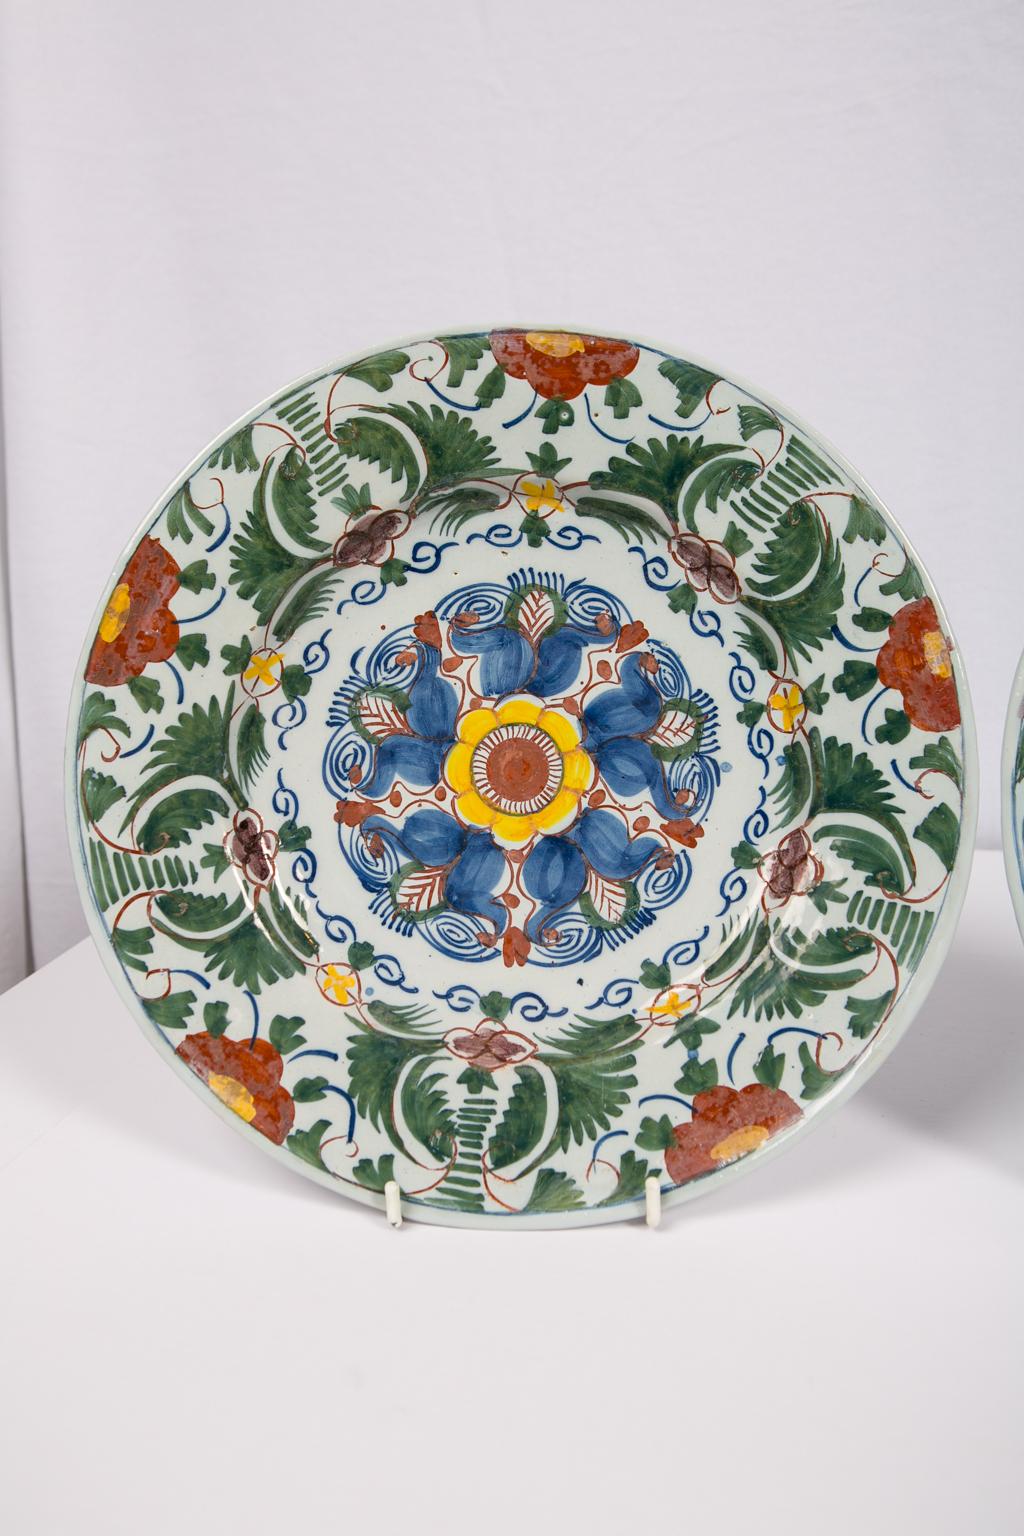 A pair of 18th century Delft chargers painted with a burst of polychrome colors: green, blue, orange, and yellow. The design is a geometric interpretation of tulips. The lively all-over design is outstanding.
Dimensions: 12 inches